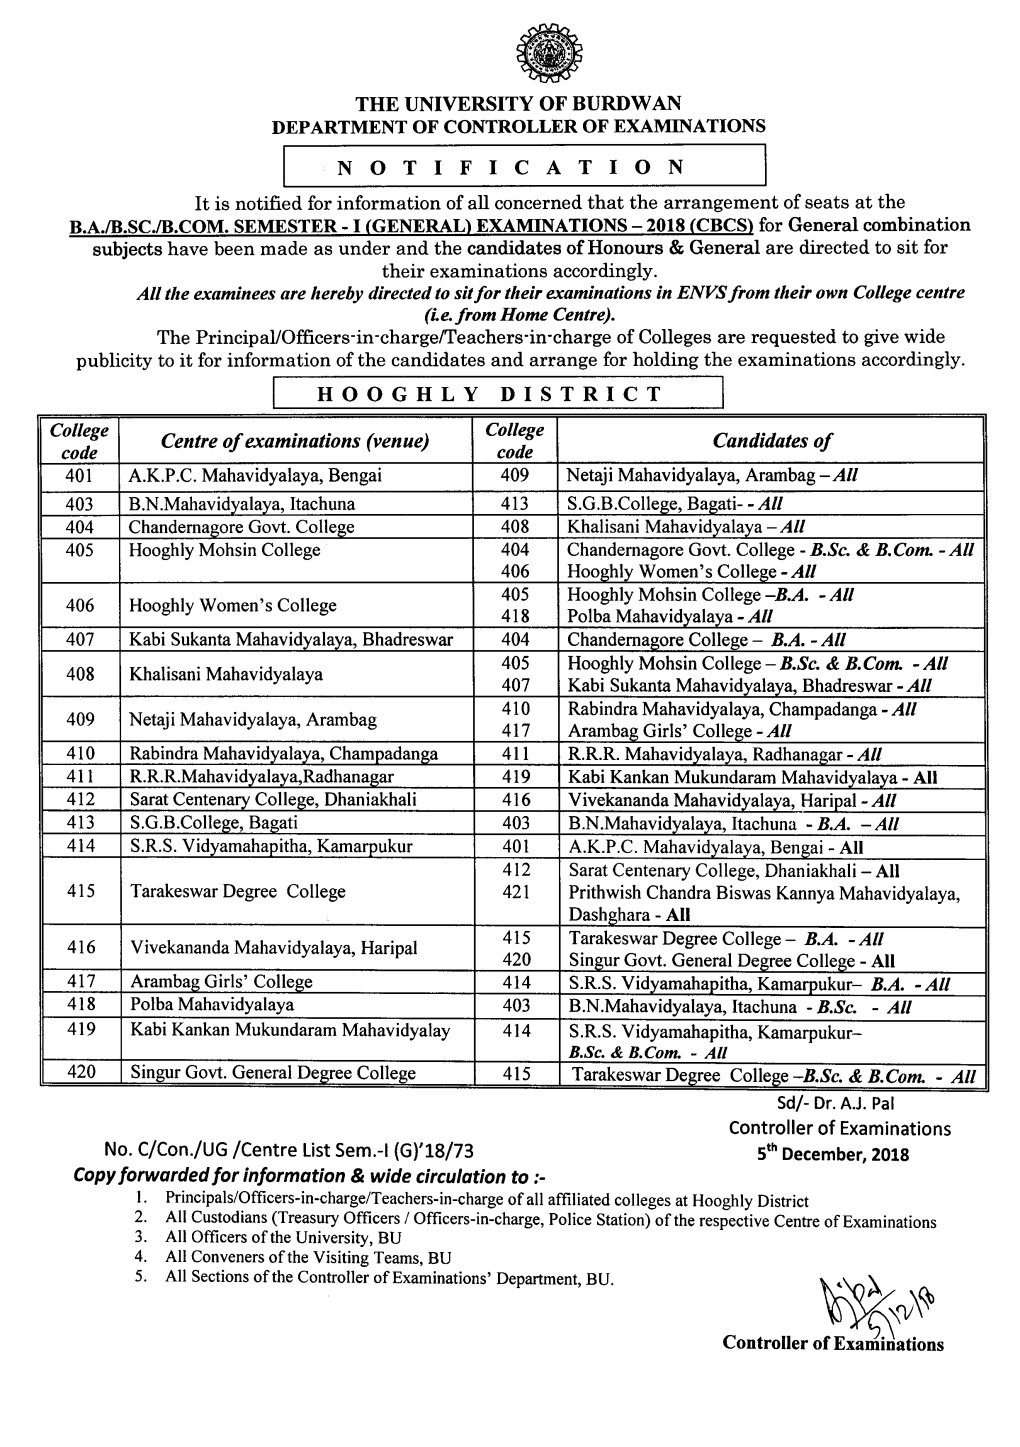 \JV~~\~ Controller of Examinations the UNIVERSITY of BURDWAN DEPARTMENT of CONTROLLER of EXAMINATIONS